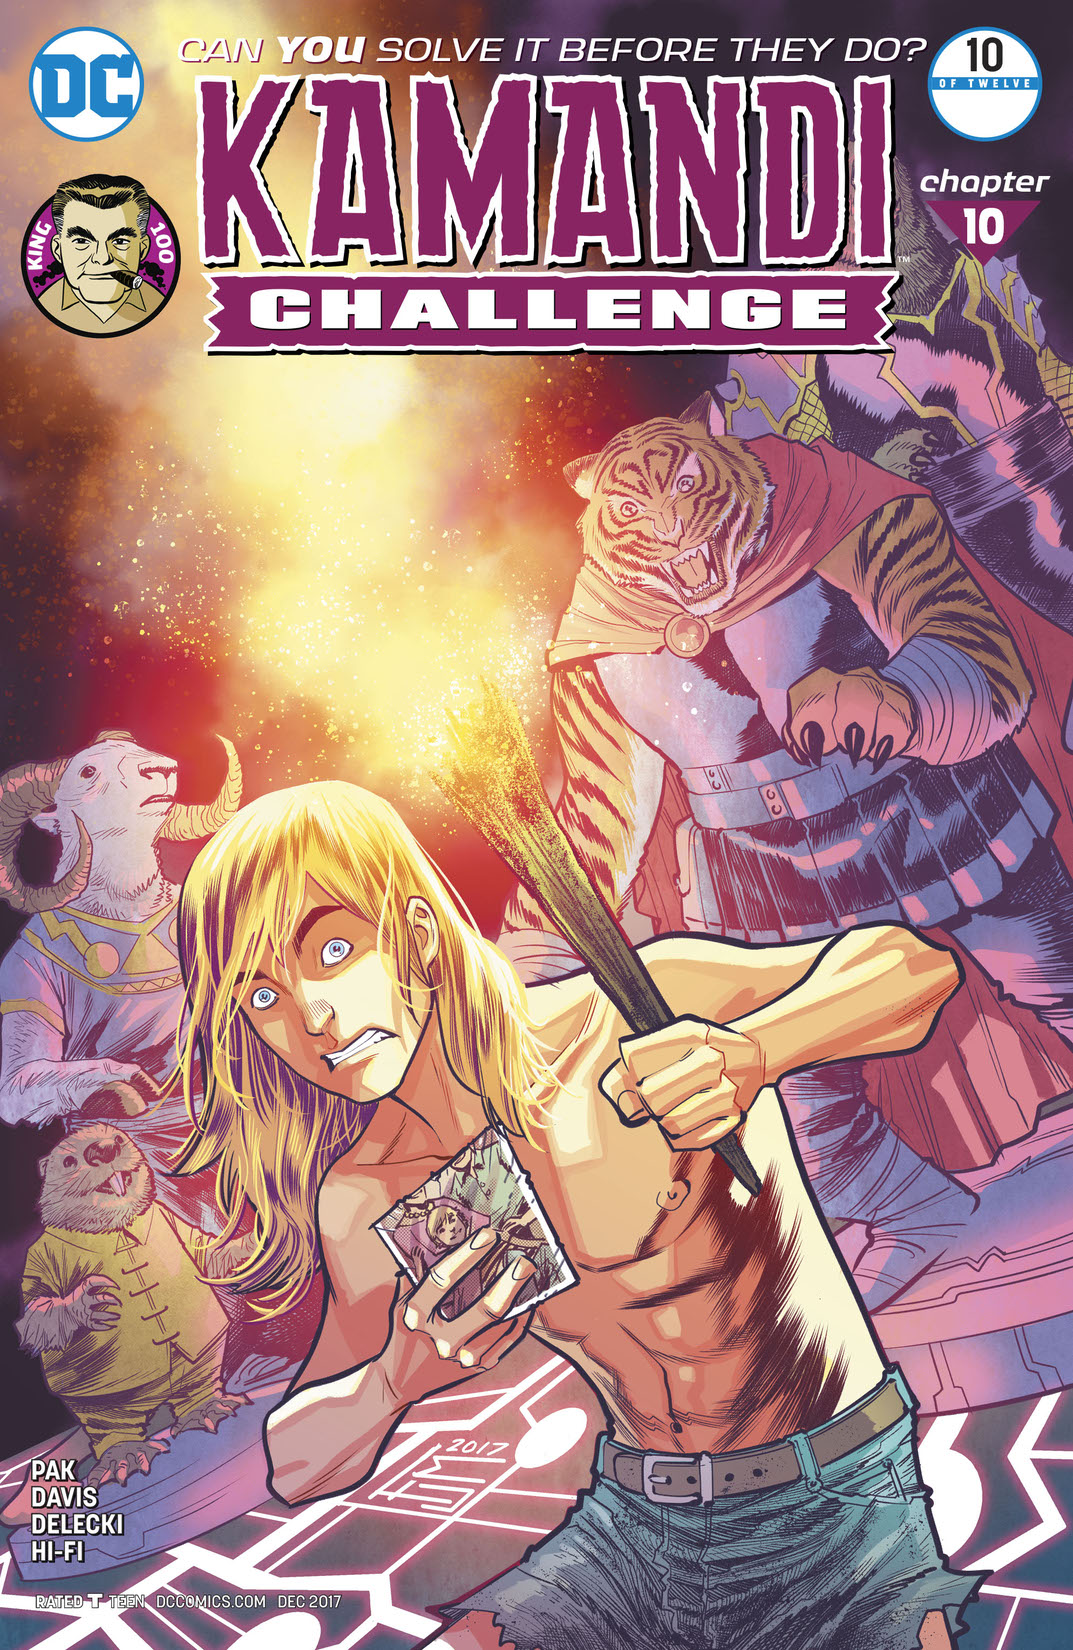 The Kamandi Challenge #10 preview images